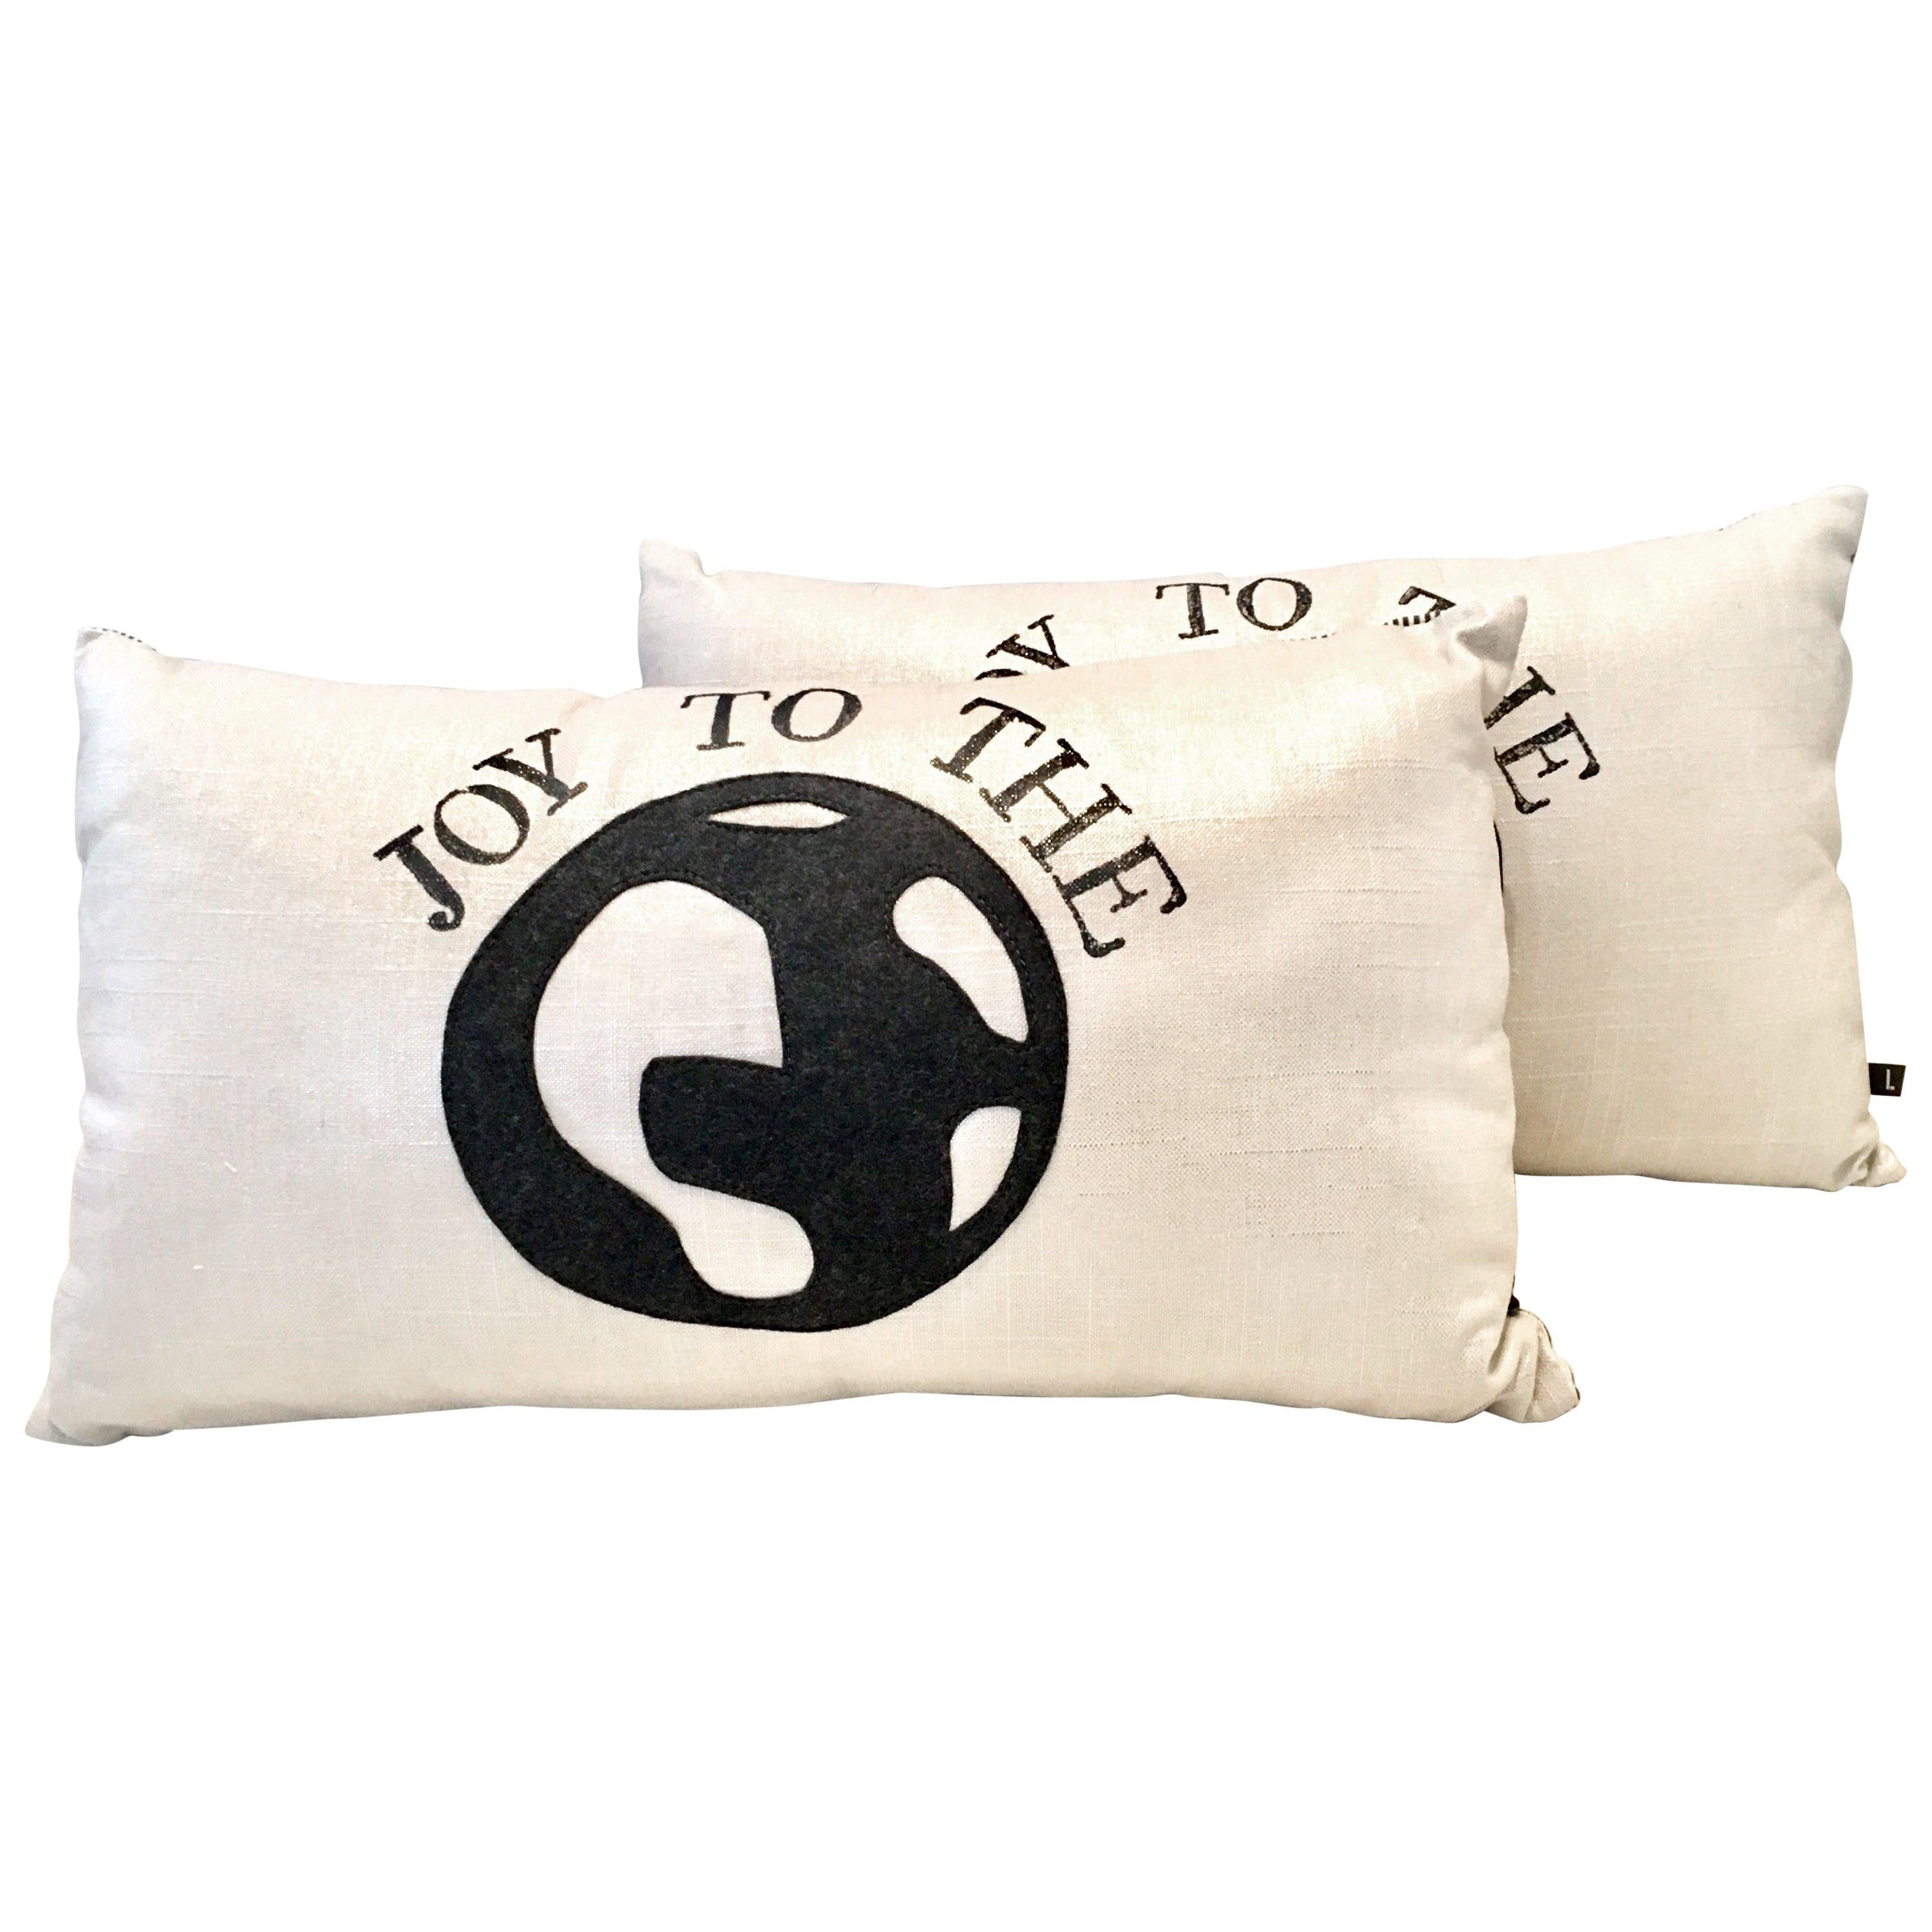 21st Century and New Pair of "Joy To The World" Metallic Coated Pillows Set of 2 For Sale